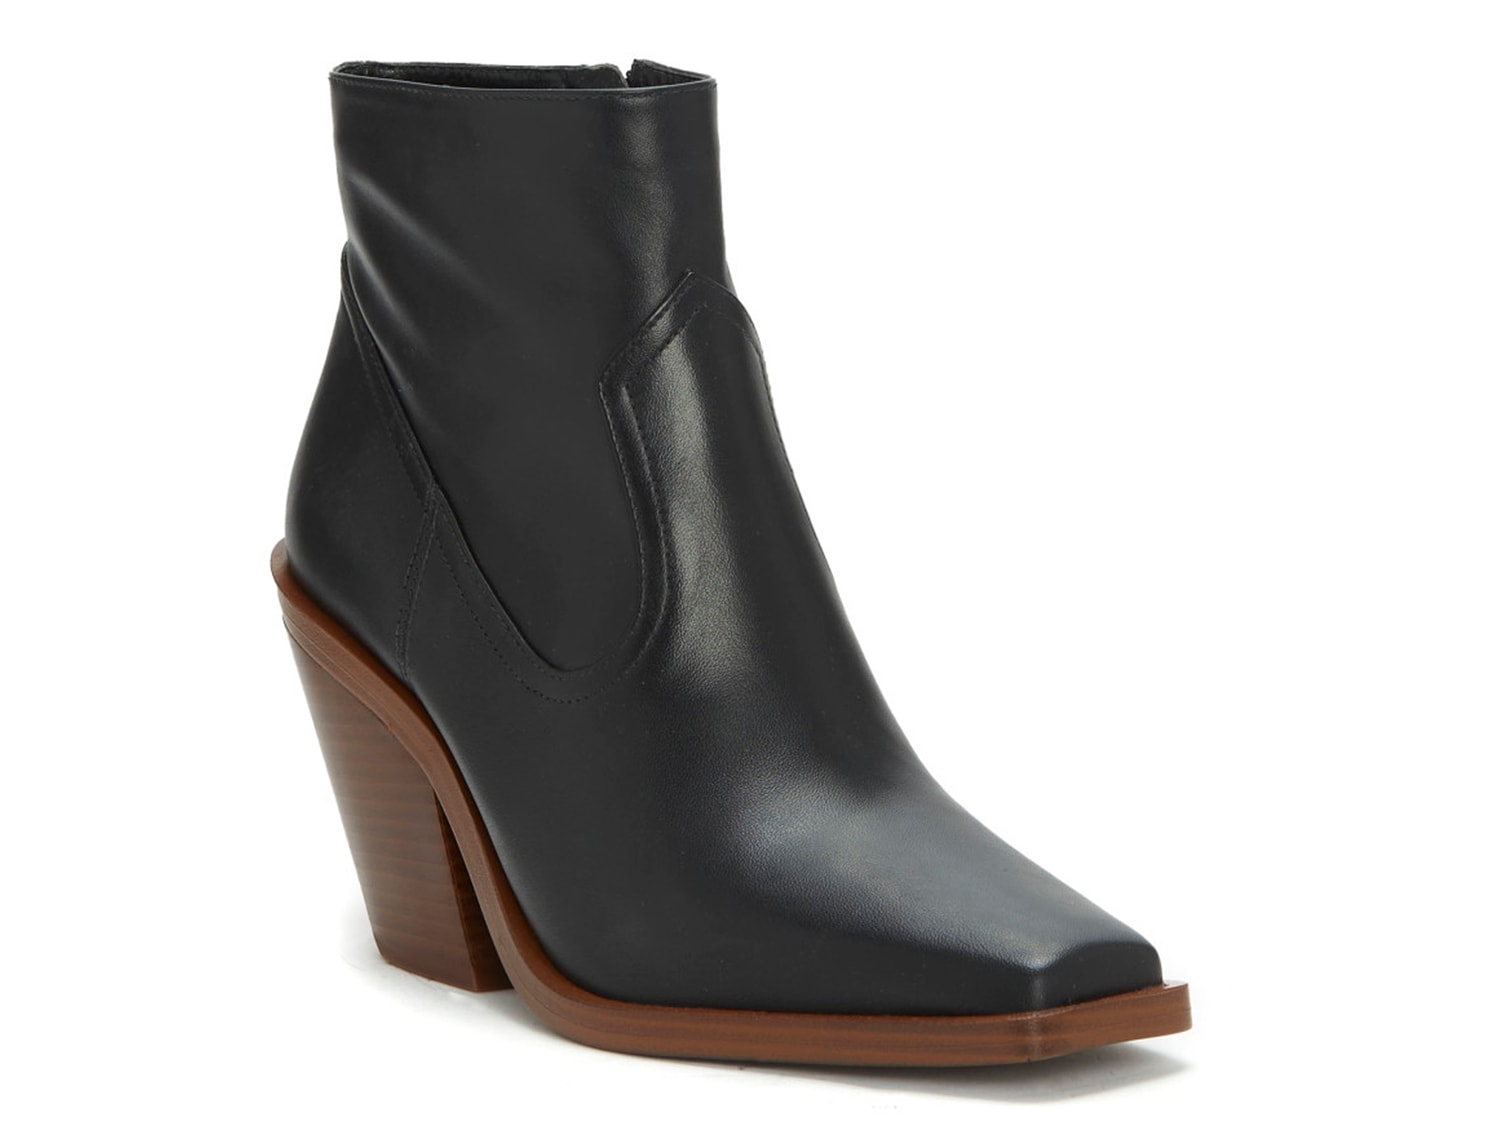 Vince Camuto Amtinda Bootie - Free Shipping | DSW